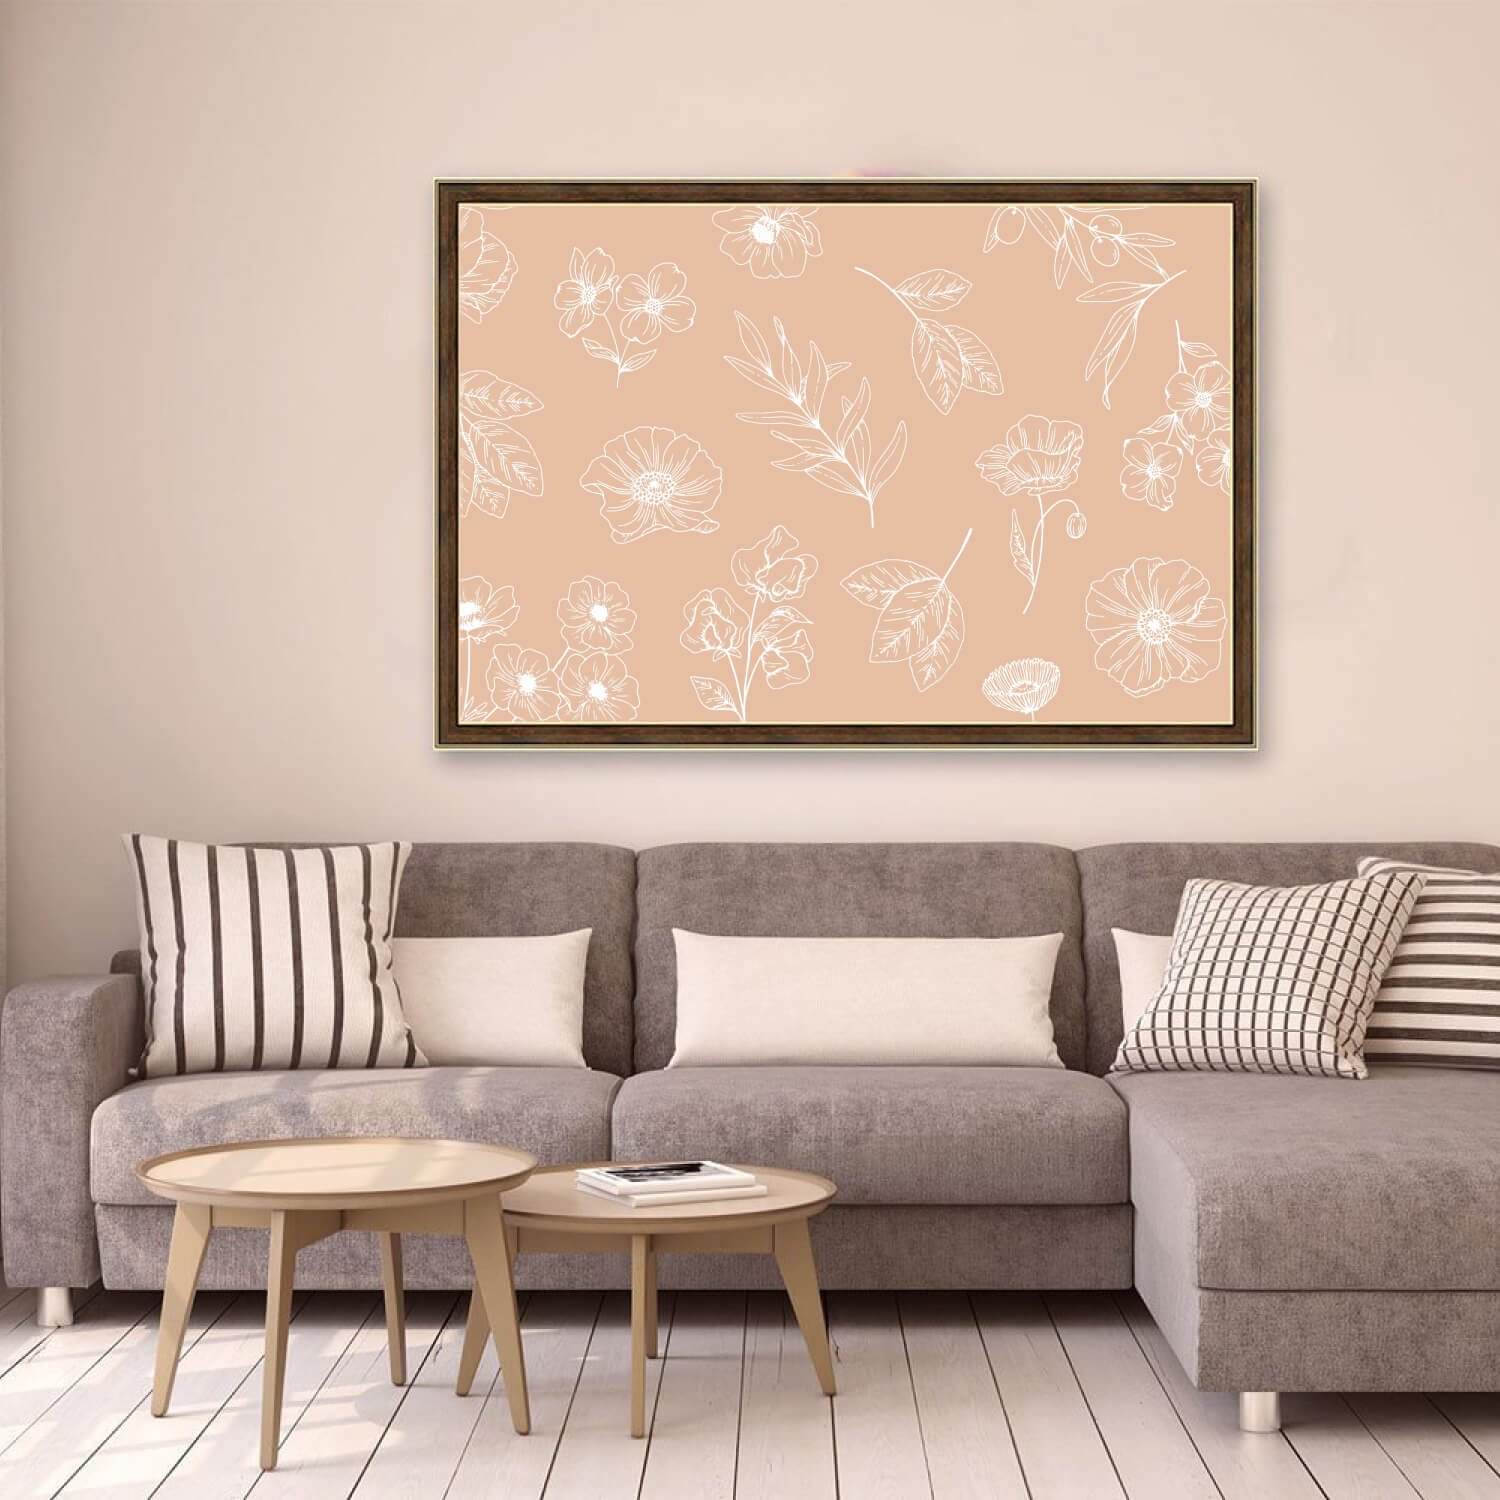 Flowers on Picture in Room's Design.